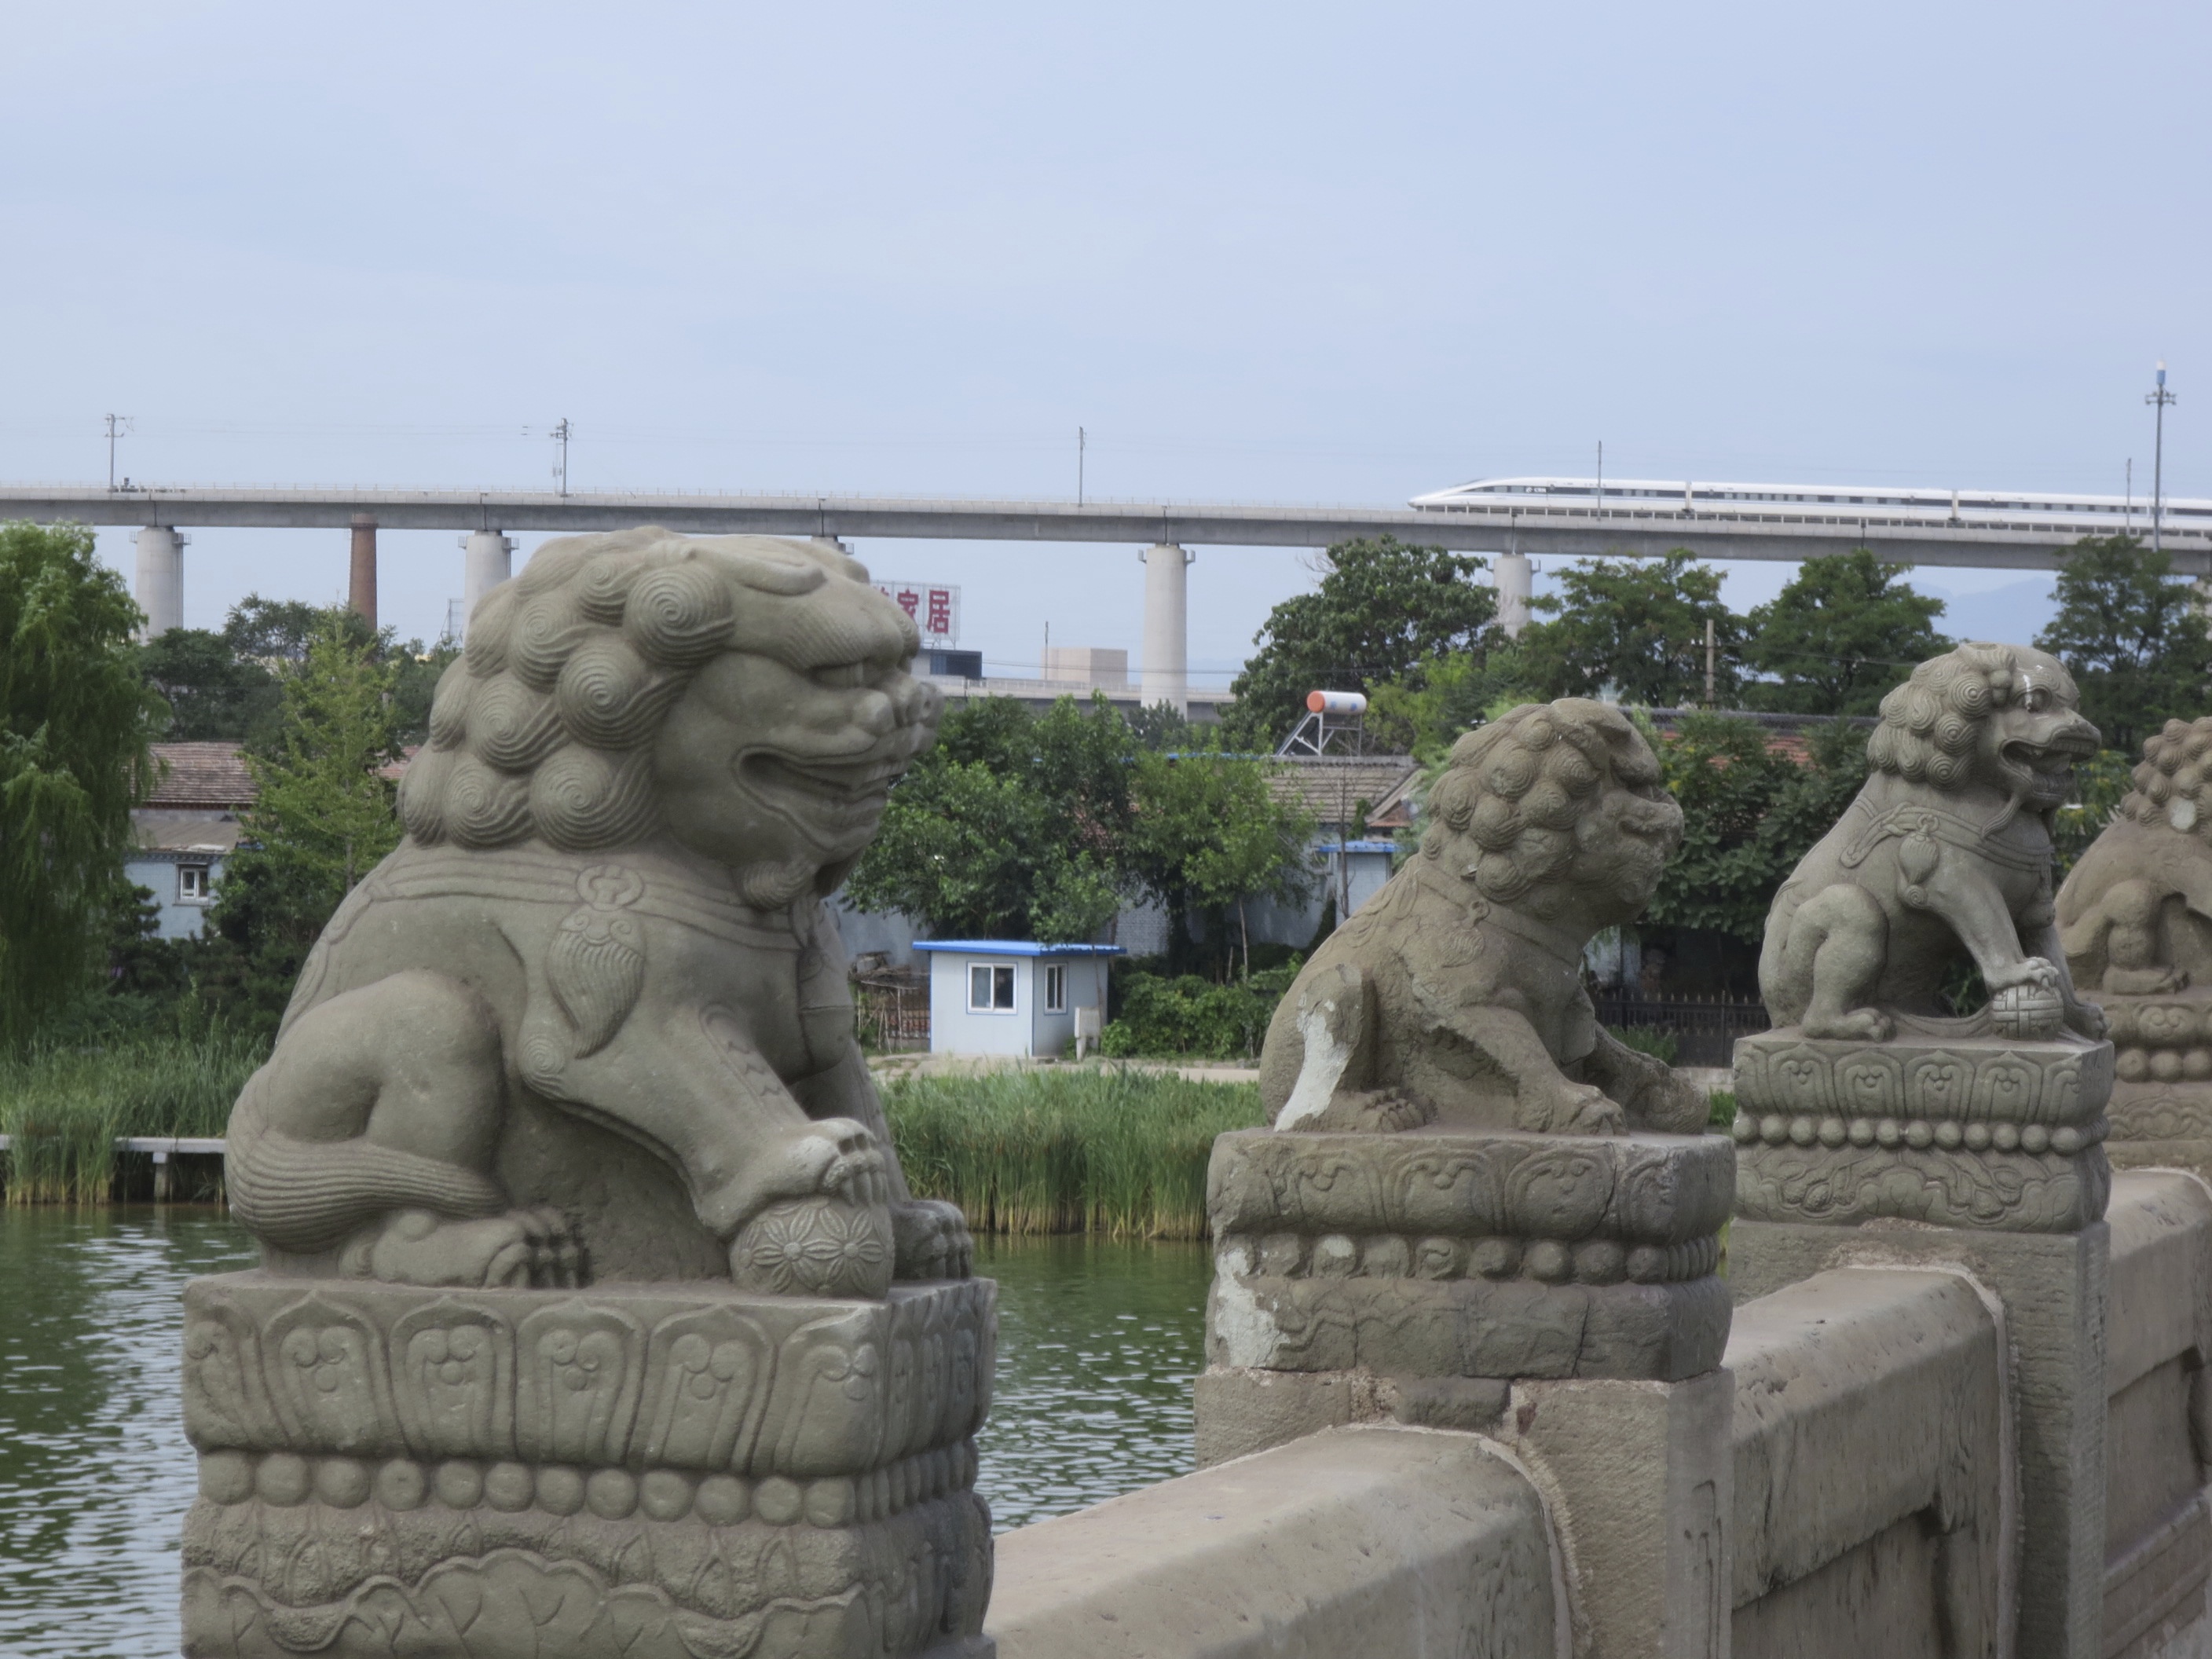 Marco Polo Bridge stone lions with present-day elevated high-speed train passing in background. Source: Author’s Collection, 2014.